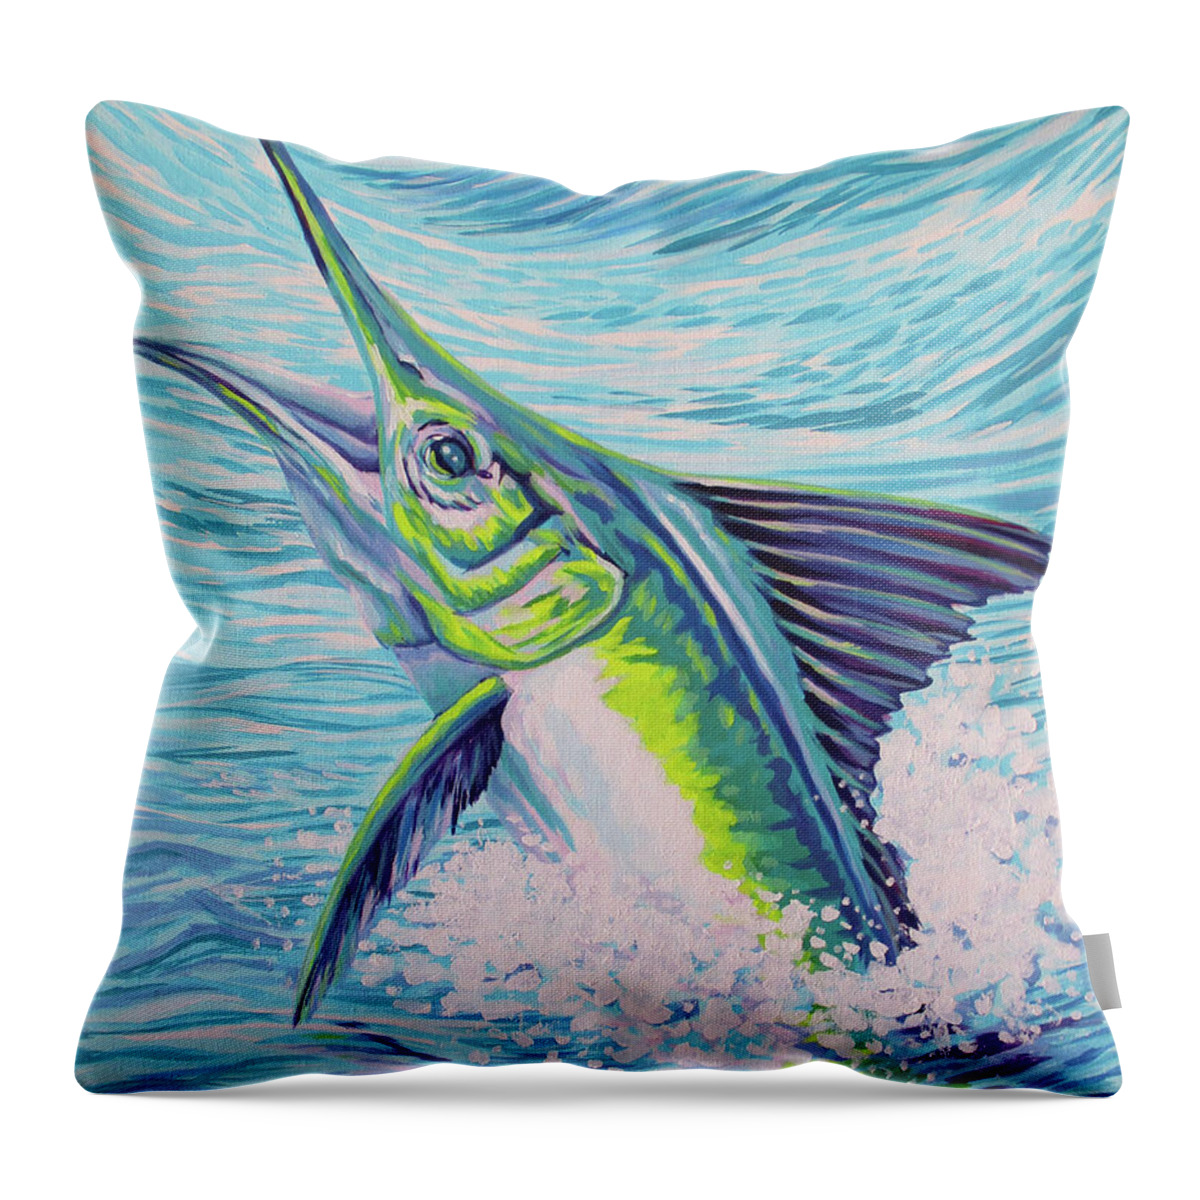 Marlin Throw Pillow featuring the painting Jumping Marlin by Tish Wynne